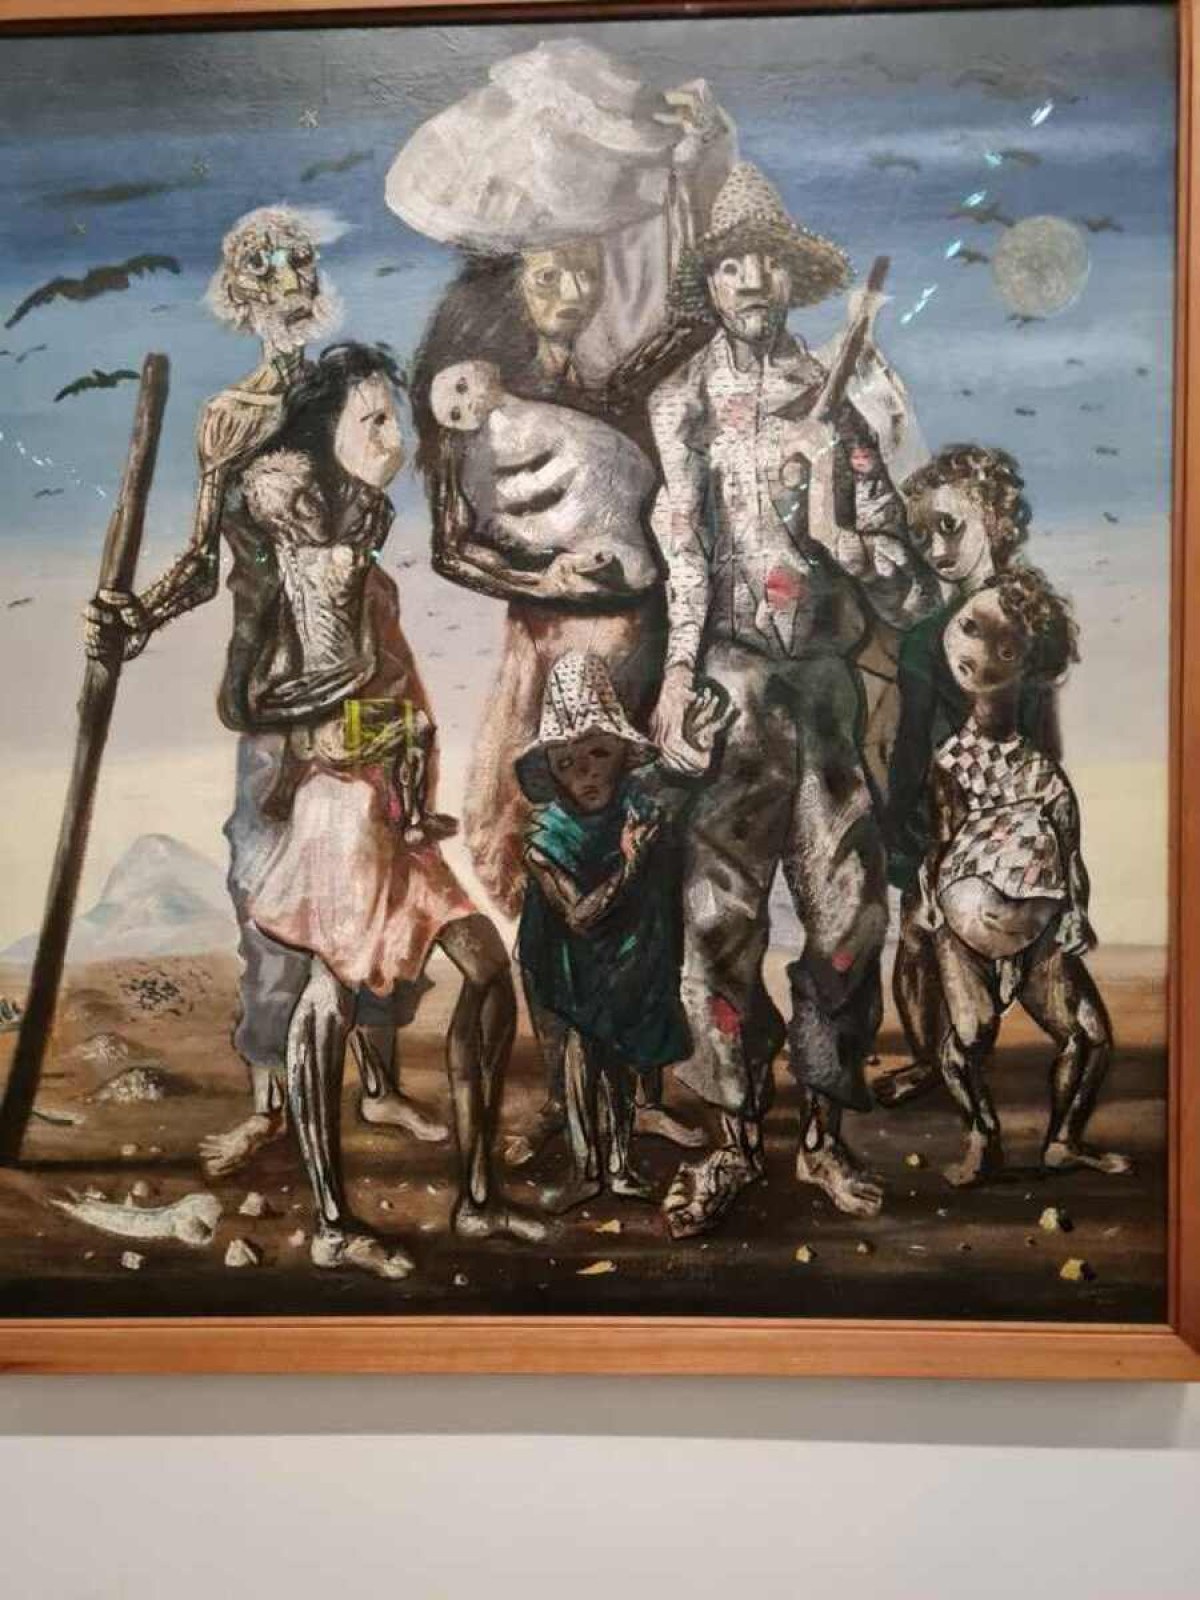 The Migrants, by Candido Portinari, on display in Masp